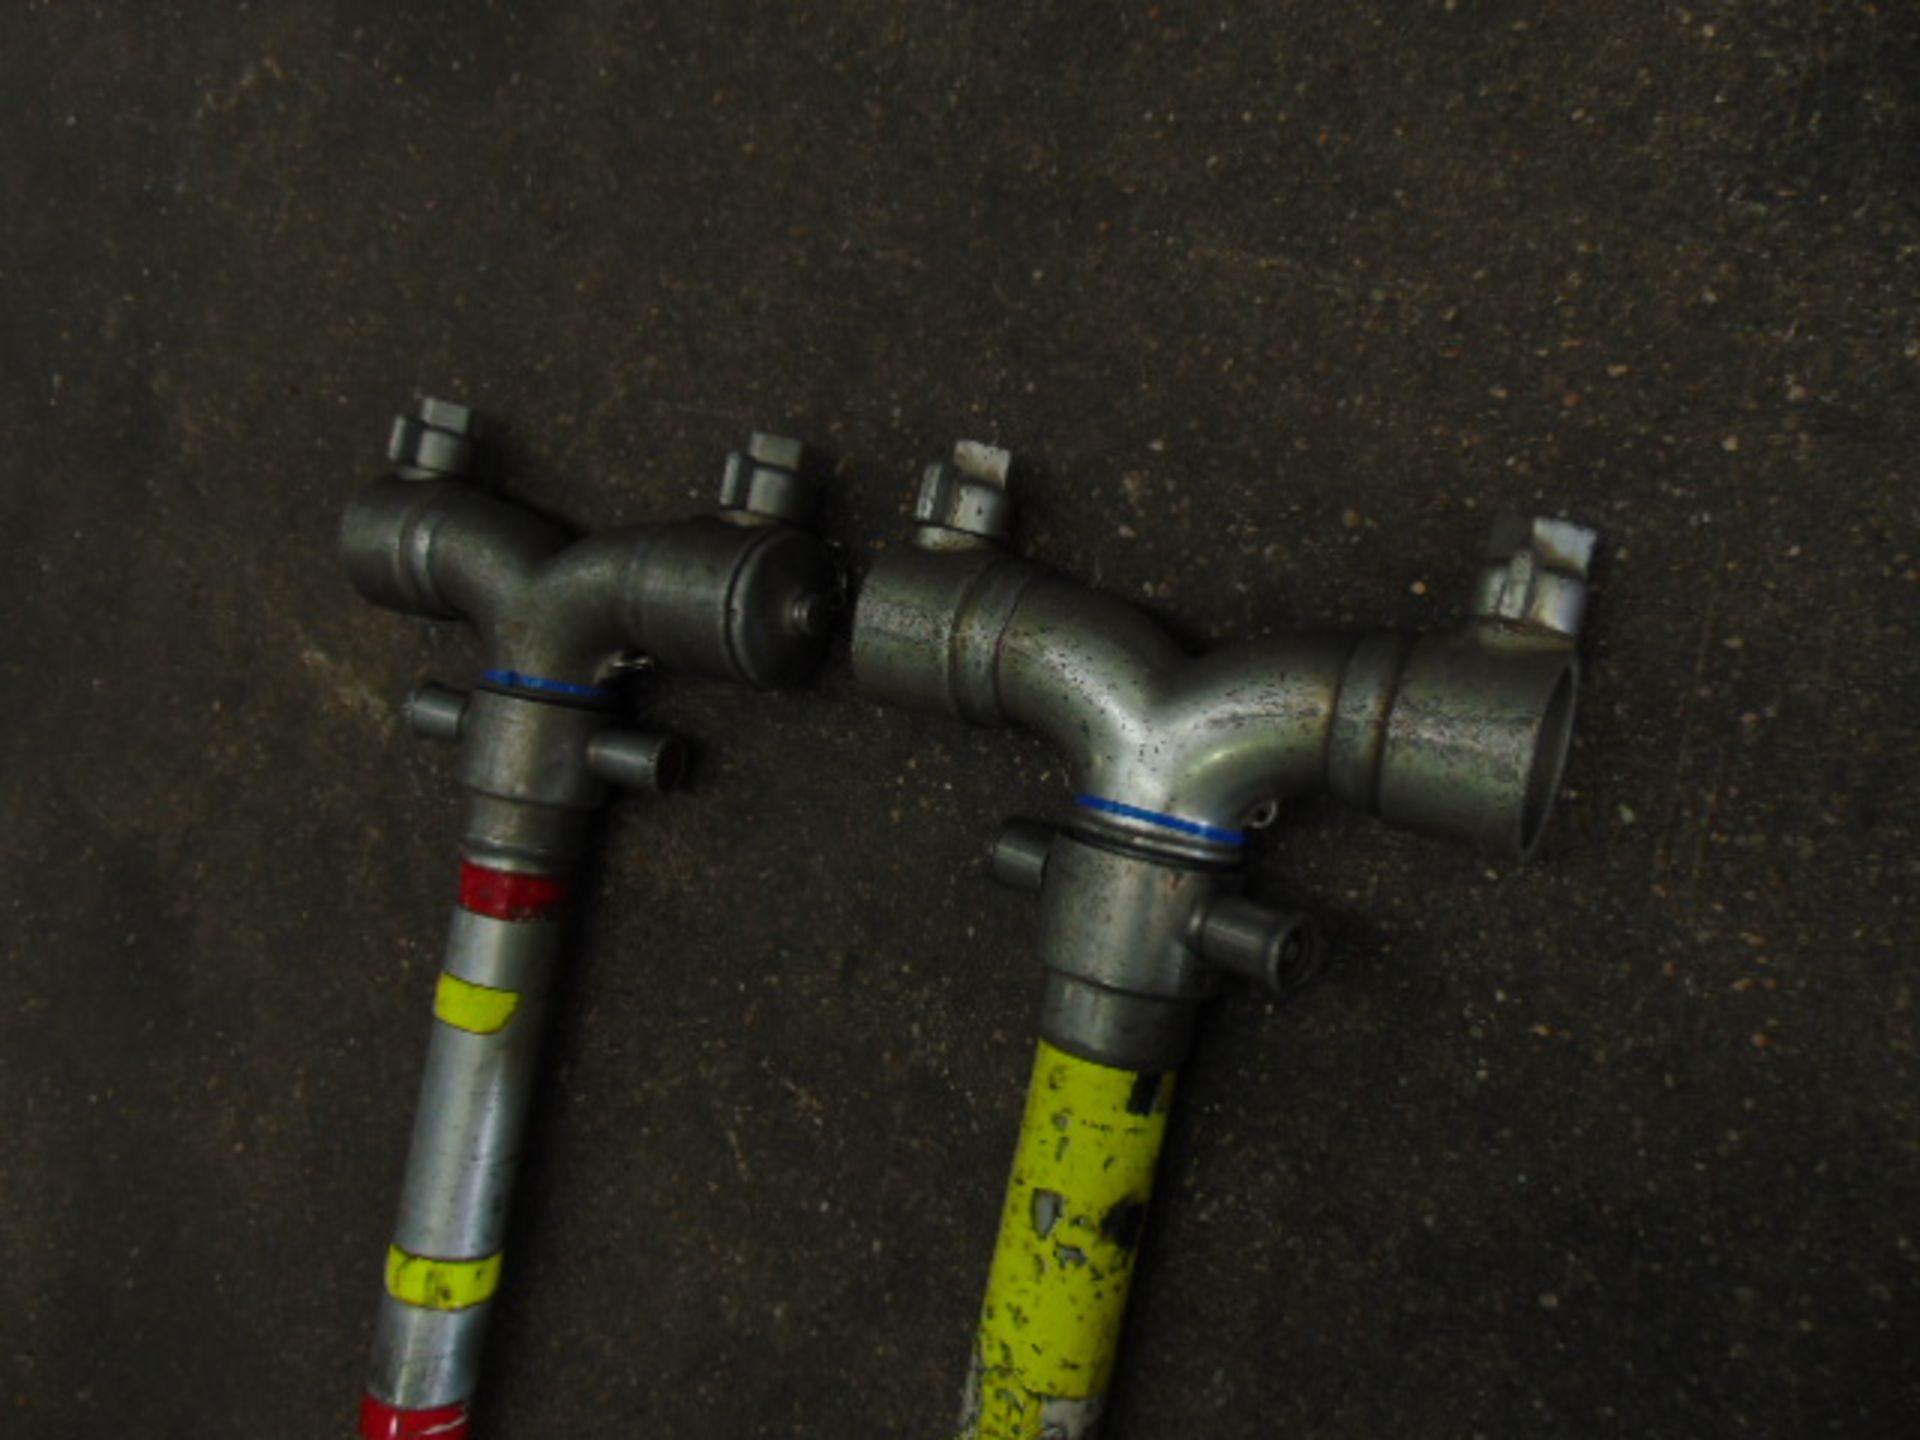 2 x Double Headed Standpipes - Image 2 of 2